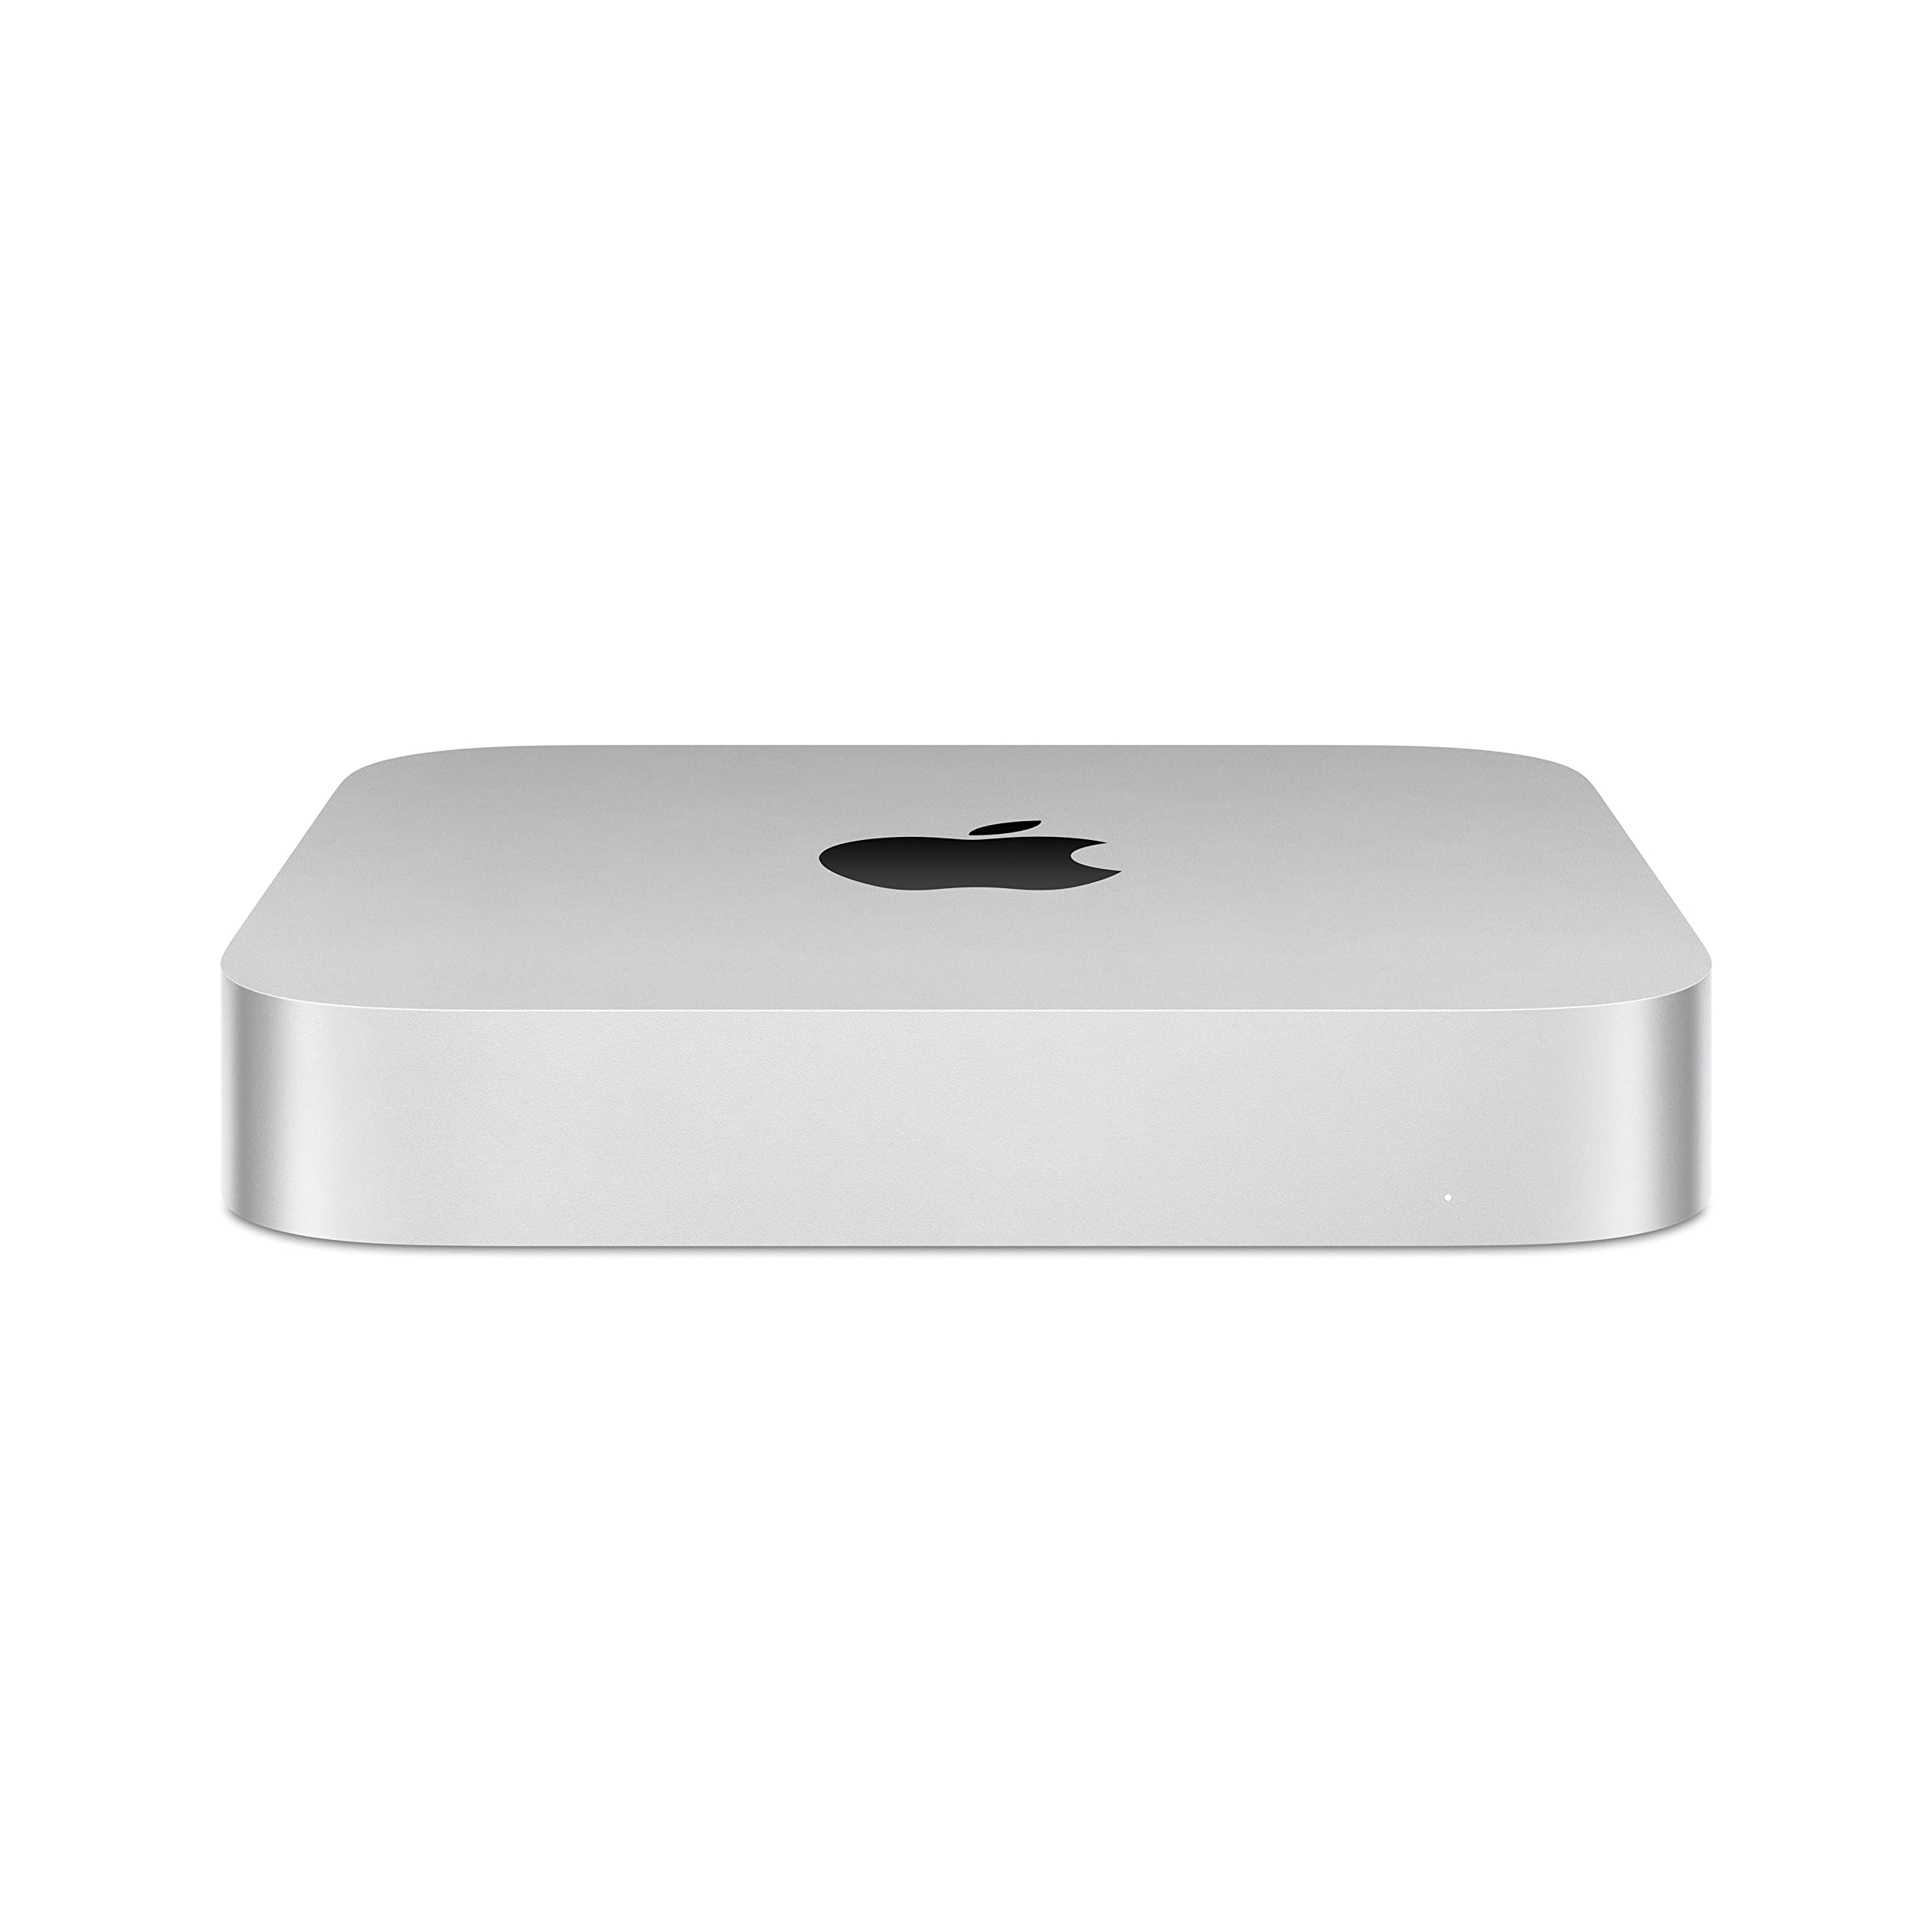 Apple 2023 Mac Mini Desktop Computer M2 Pro chip with 10?core CPU and 16?core GPU, 16GB Unified Memory, 512GB SSD Storage, Gigabit Ethernet. Works with iPhone/iPad